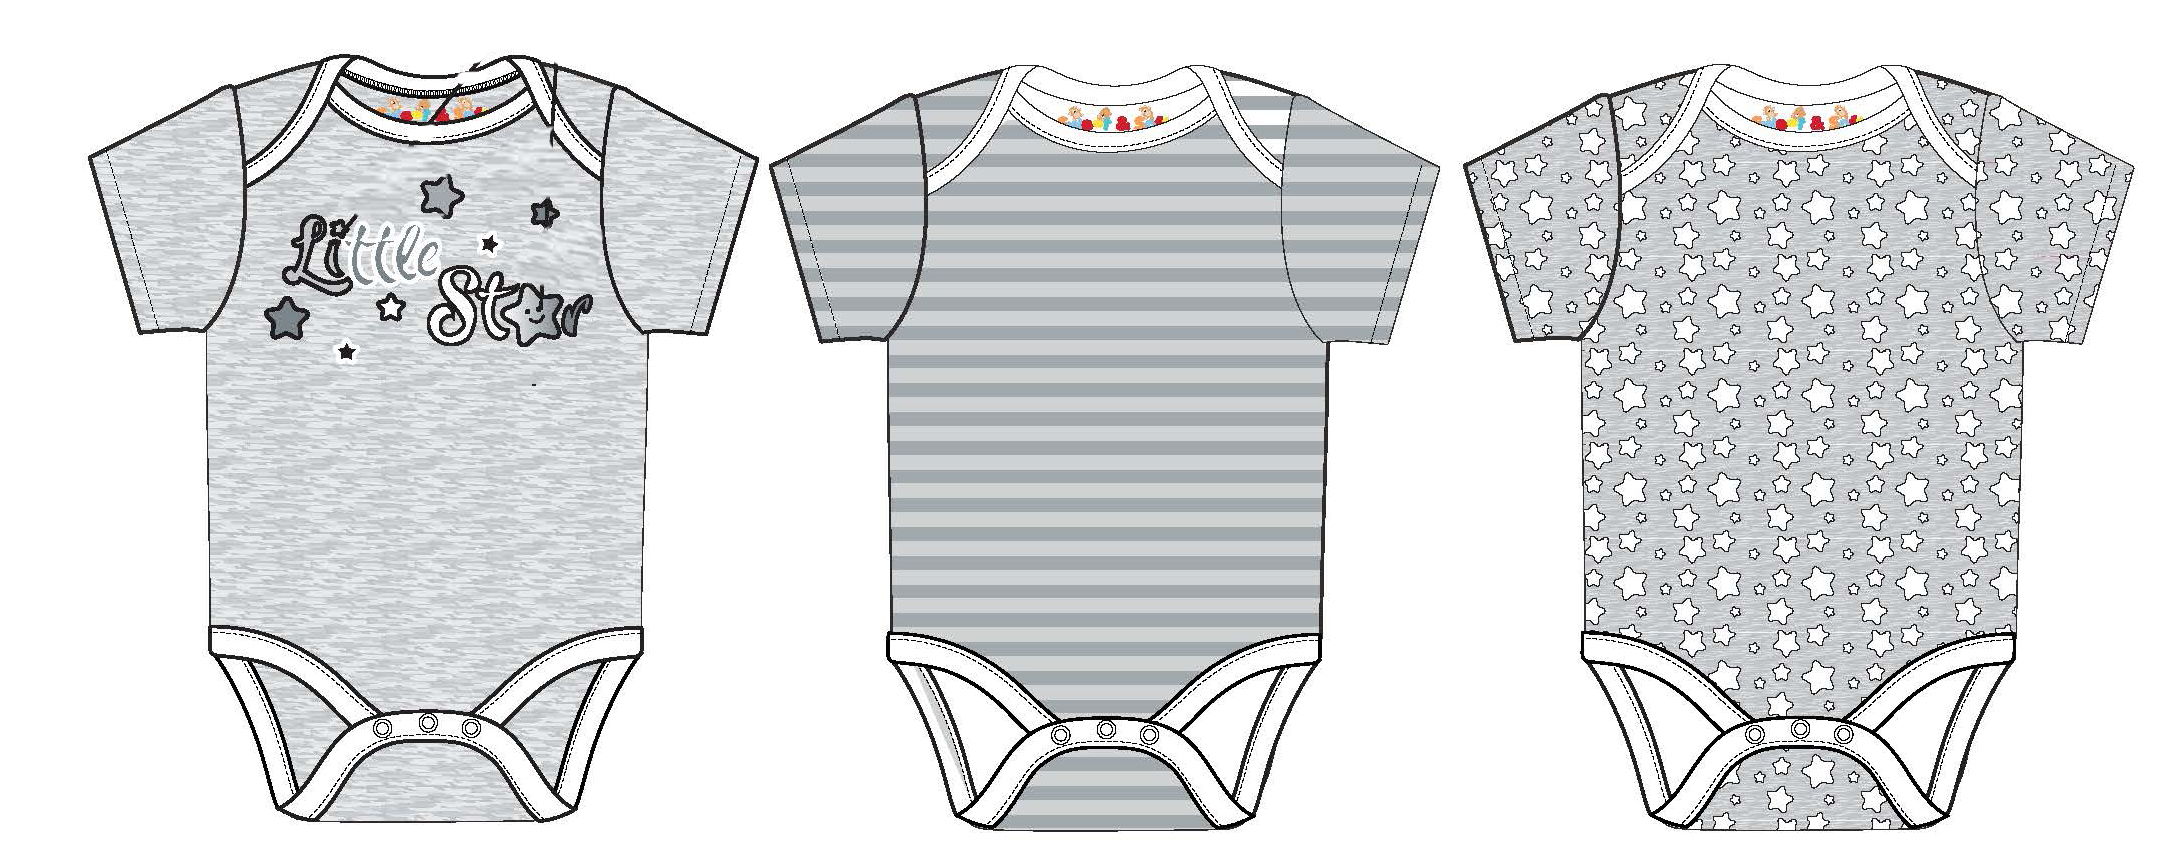 ''Baby Boy's Printed Short-Sleeve Onesie w/ Stripes, Night Sky, Embroidered Little Star Print - Sizes